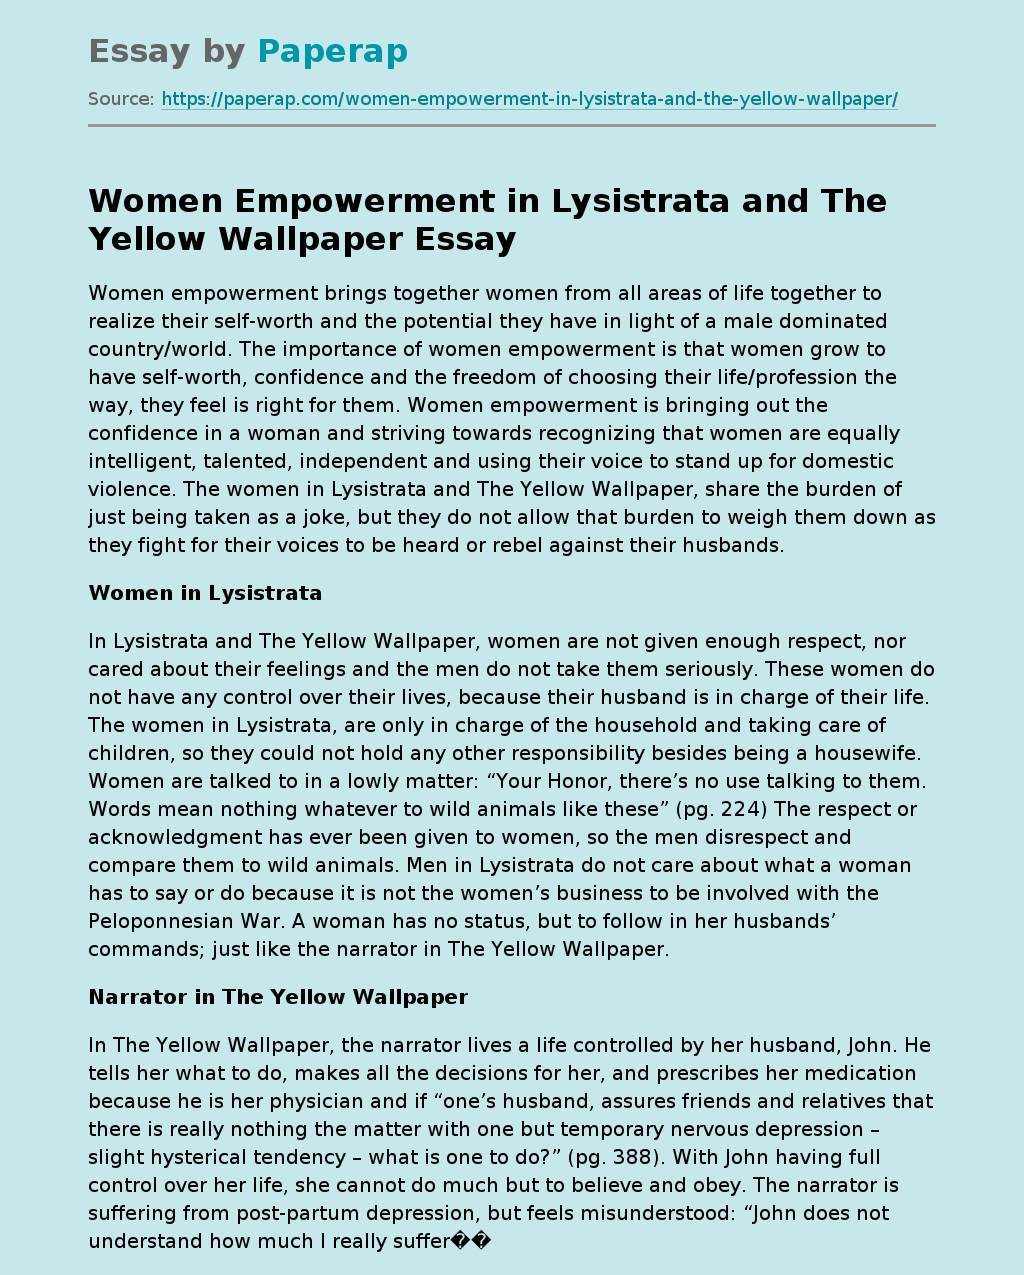 Women Empowerment in Lysistrata and The Yellow Wallpaper